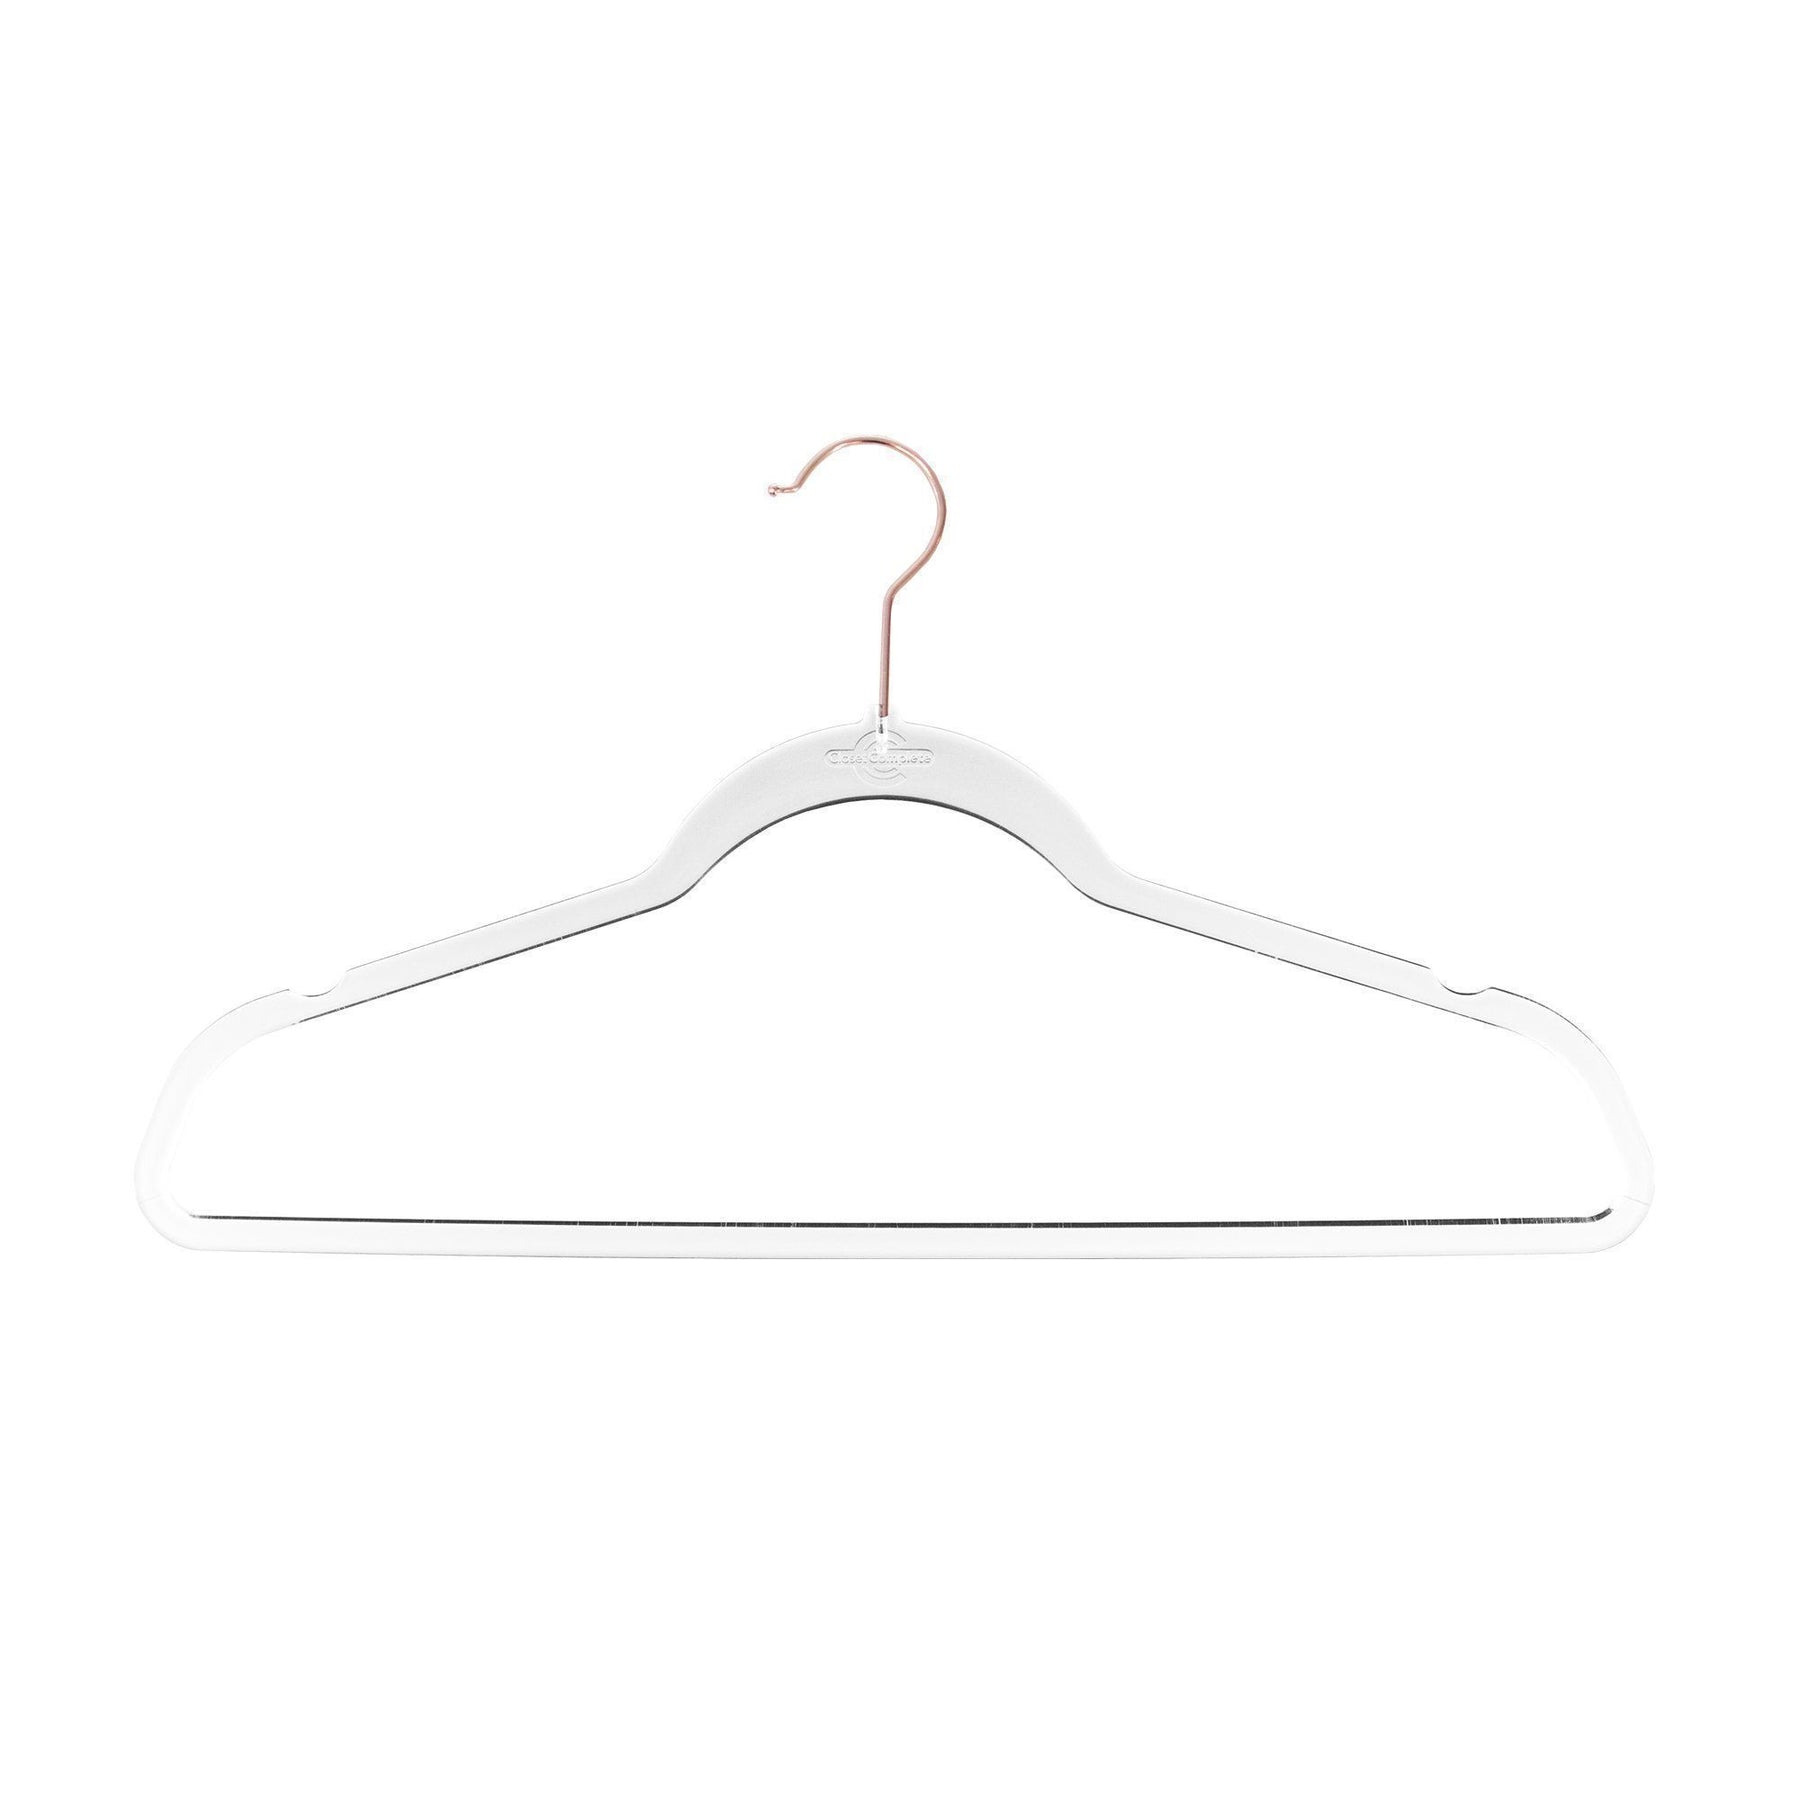 https://cdn.shopify.com/s/files/1/2993/5404/products/closet-complete-acrylic-hangers-completely-clear-invisible-acrylic-hangers-69185-7162740801621_1800x1800.jpg?v=1552518837